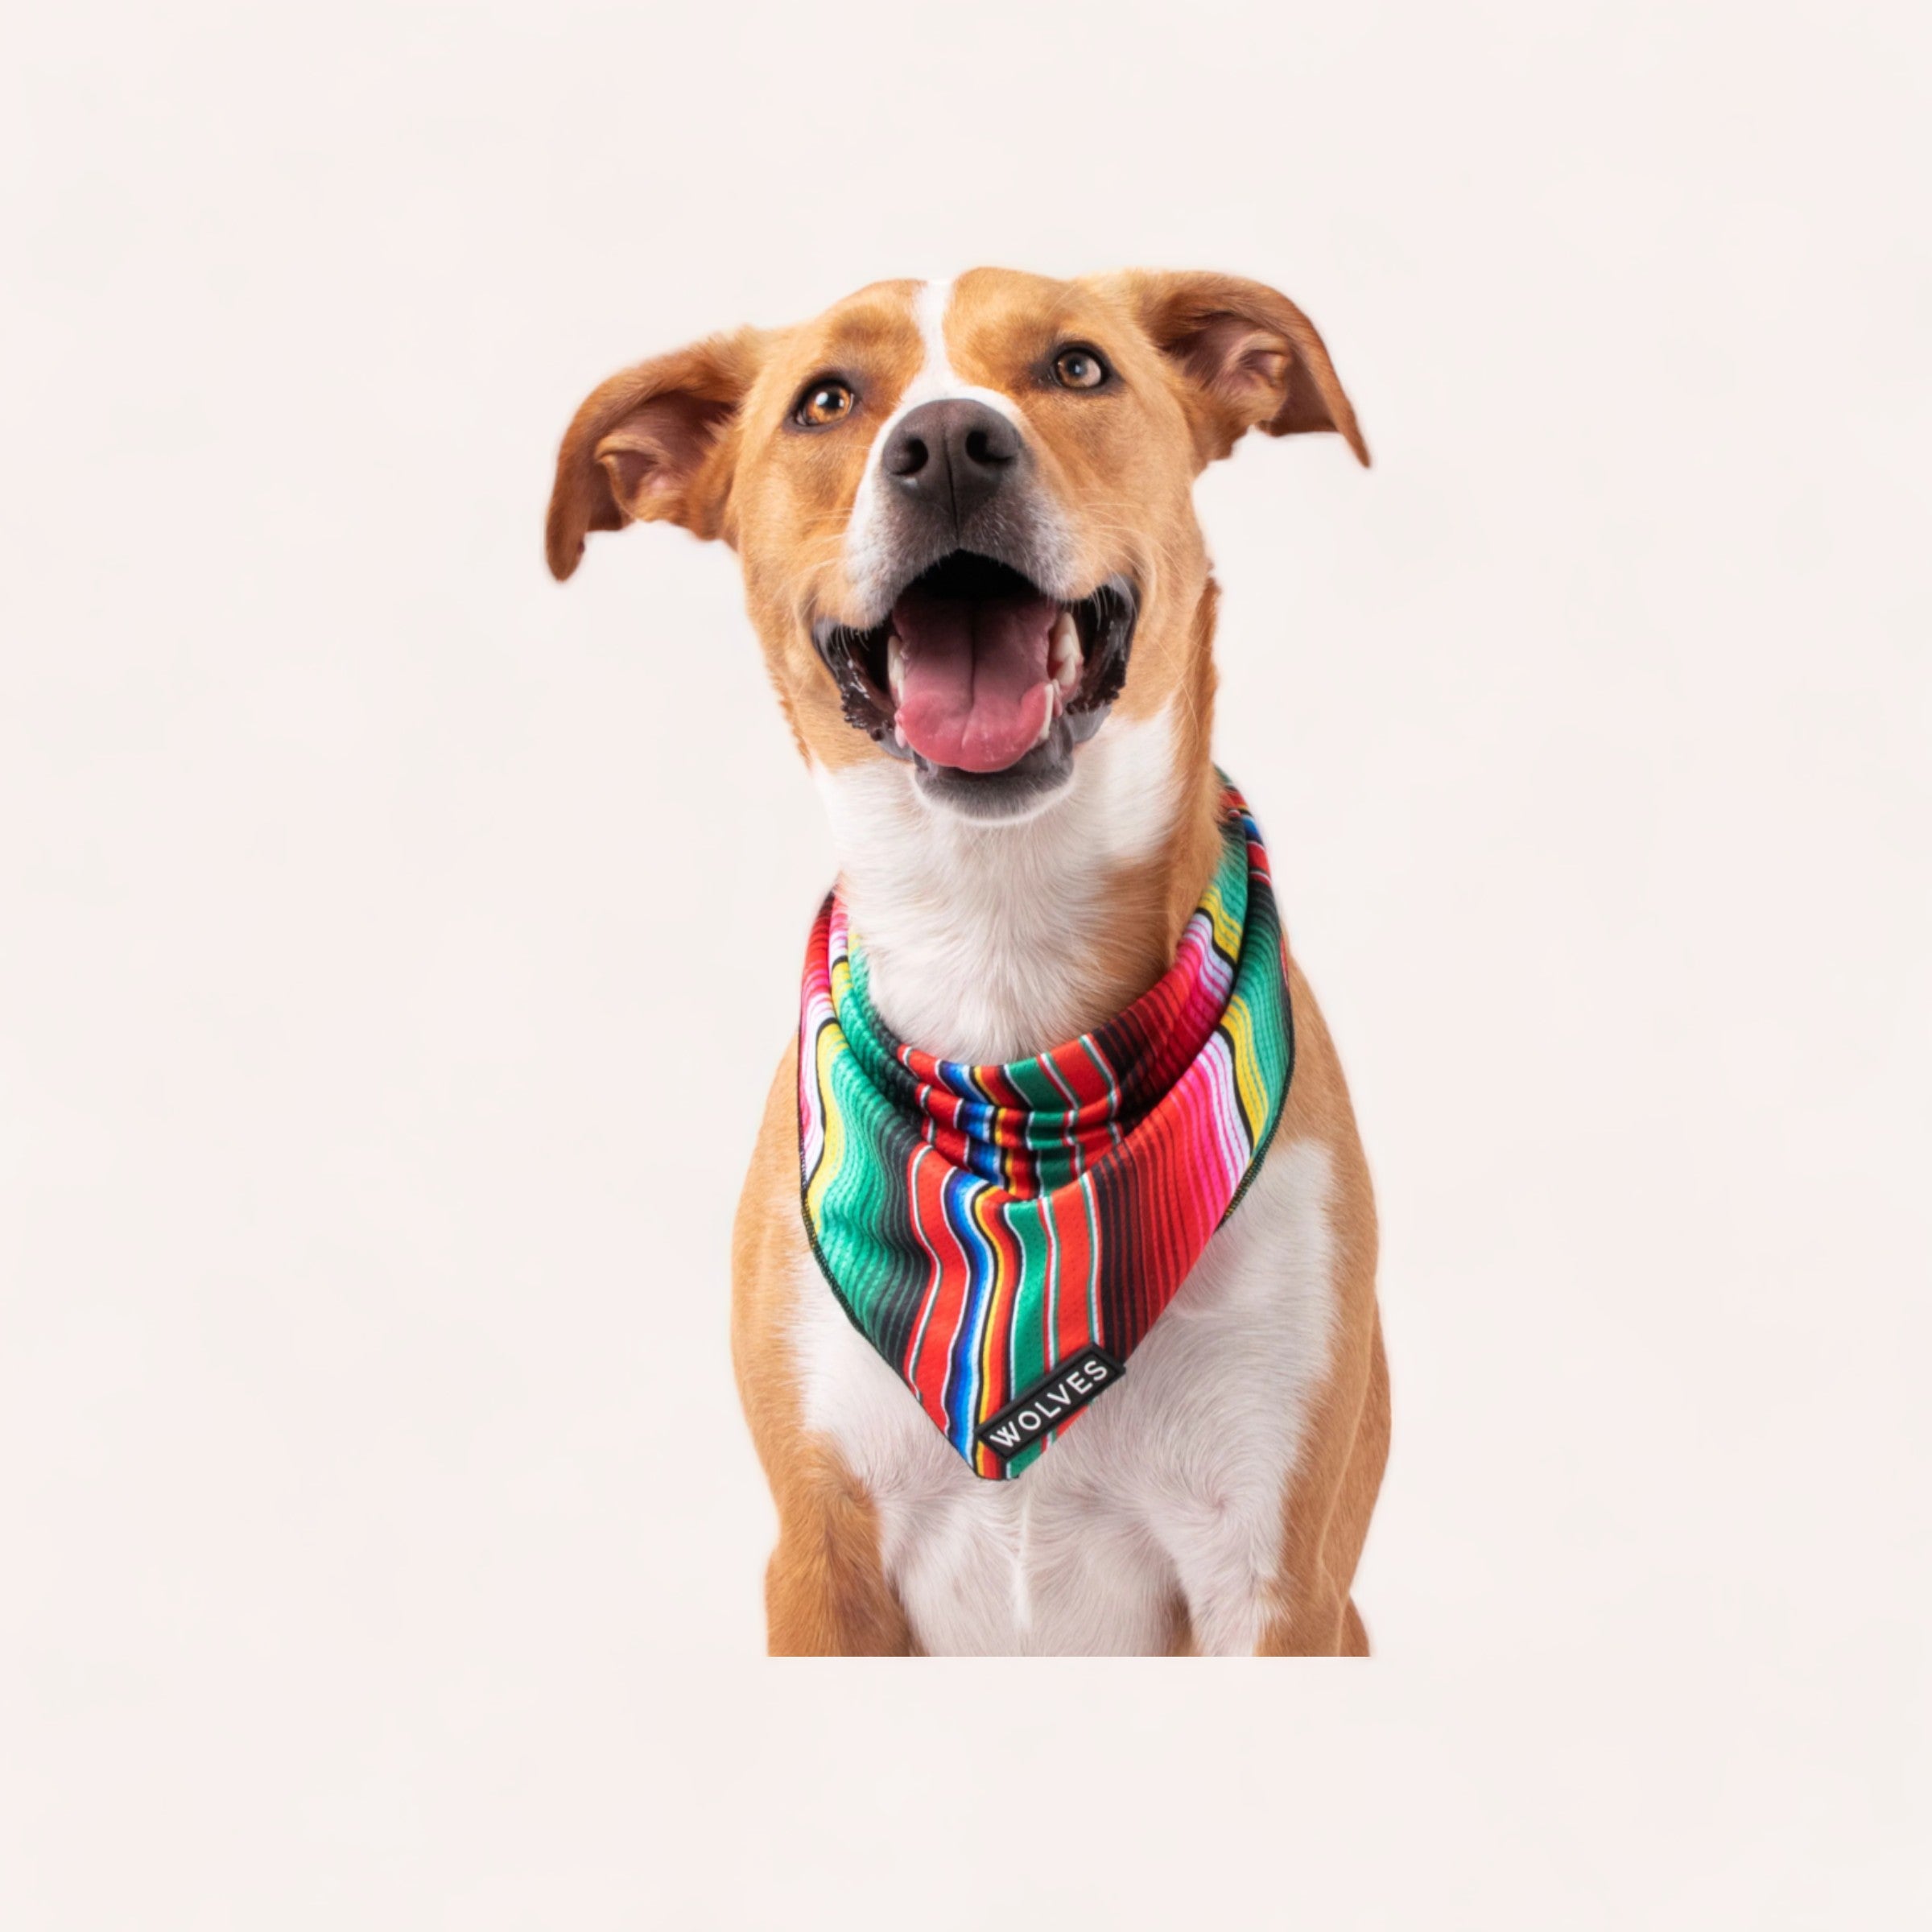 A joyful dog with a Rayne Bandana by Wolves of Wellington, made from lightweight mesh material and smiling for the camera.